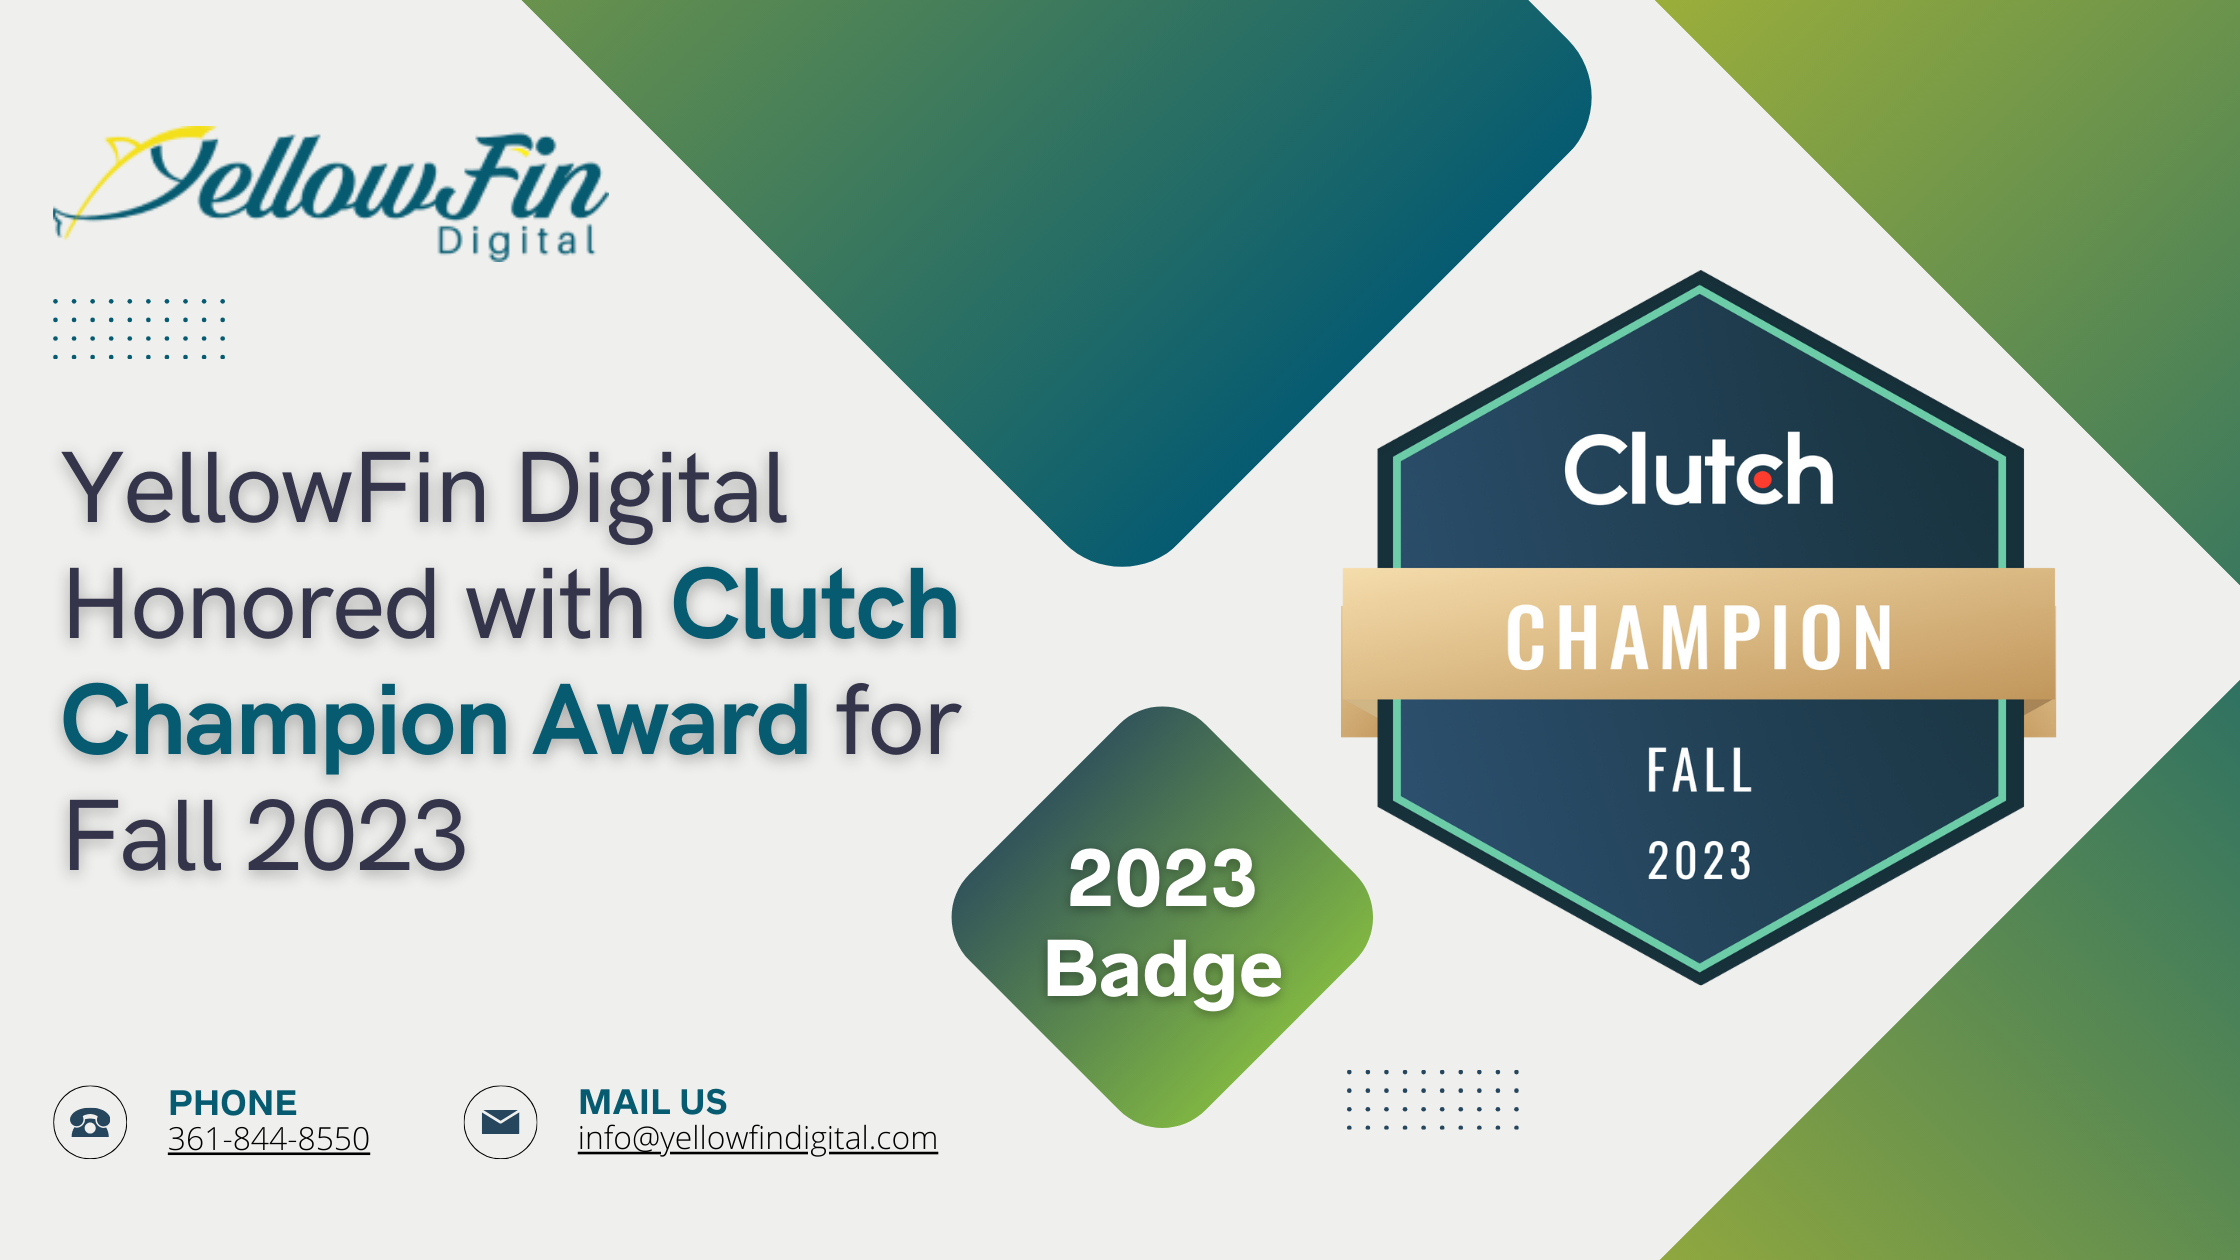 YellowFin Digital Honored with Clutch Champion Award for Fall 2023